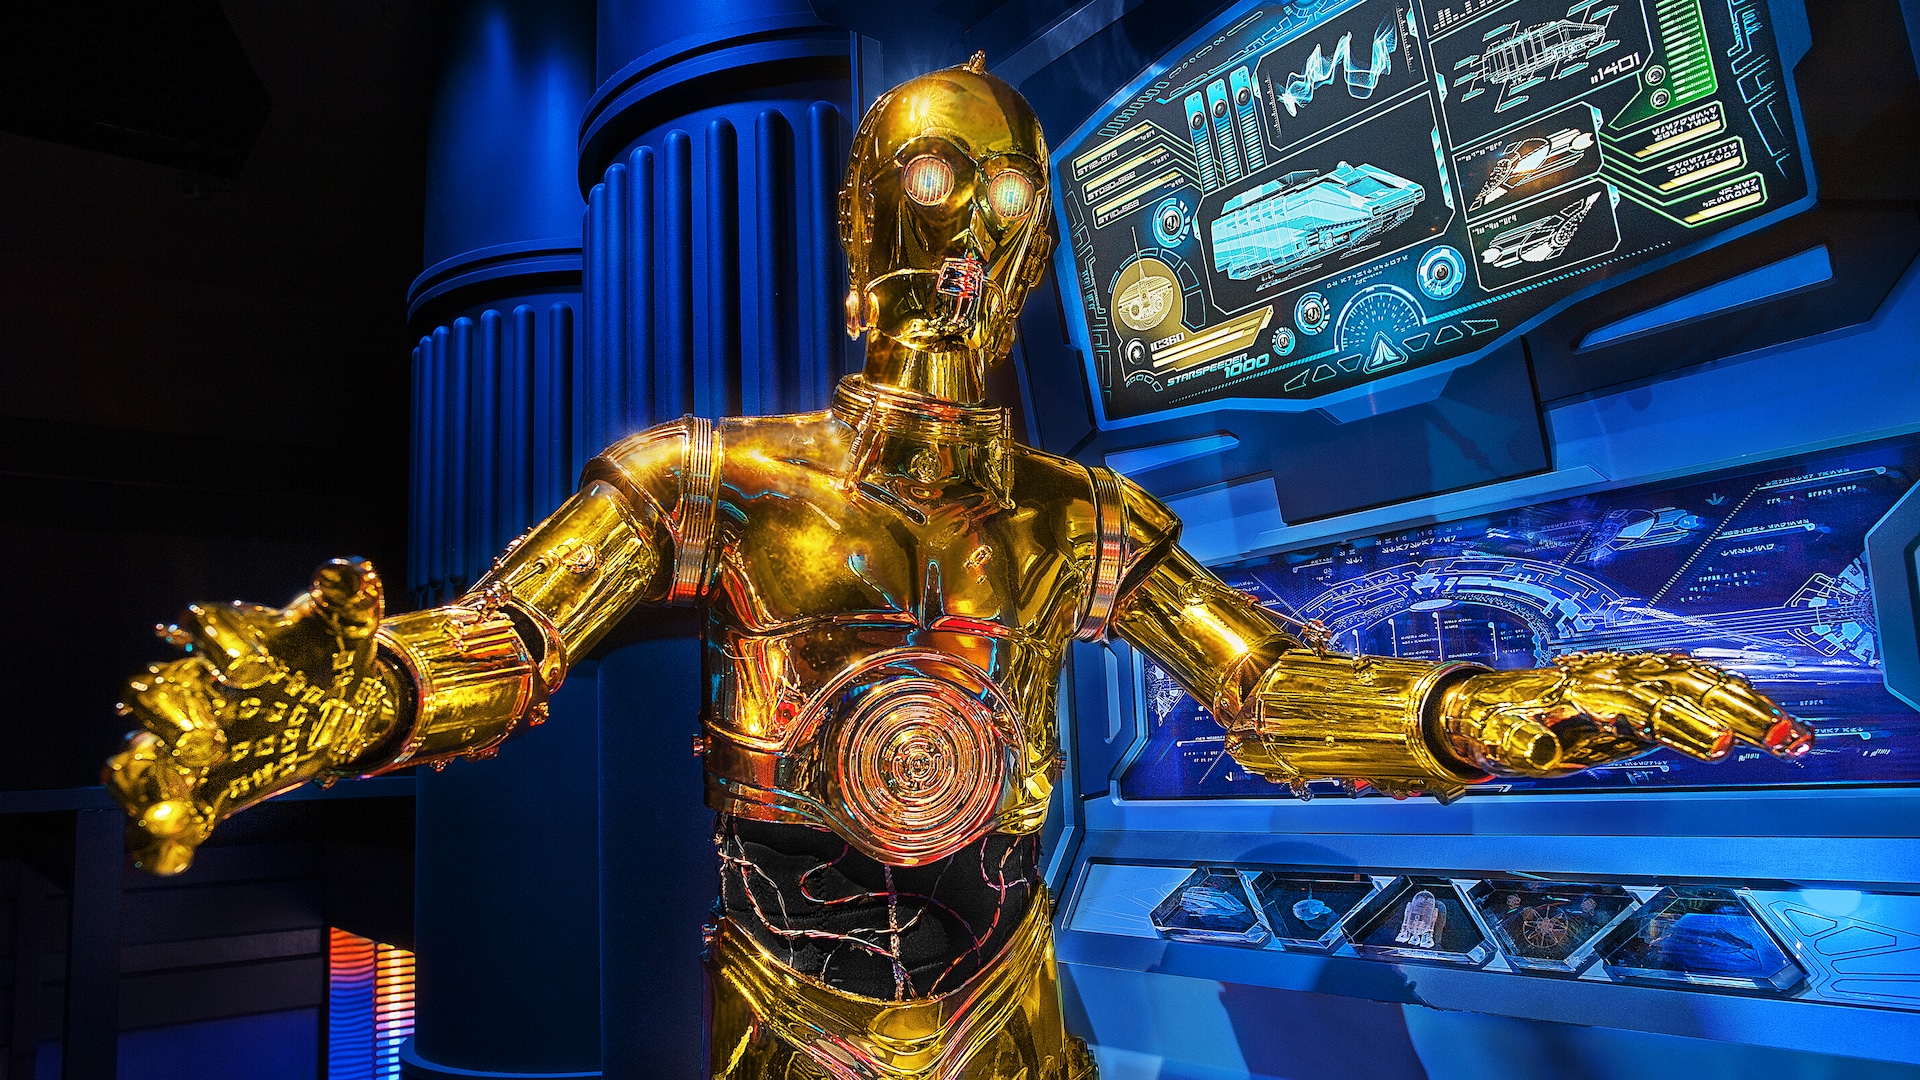 Star Tours Review